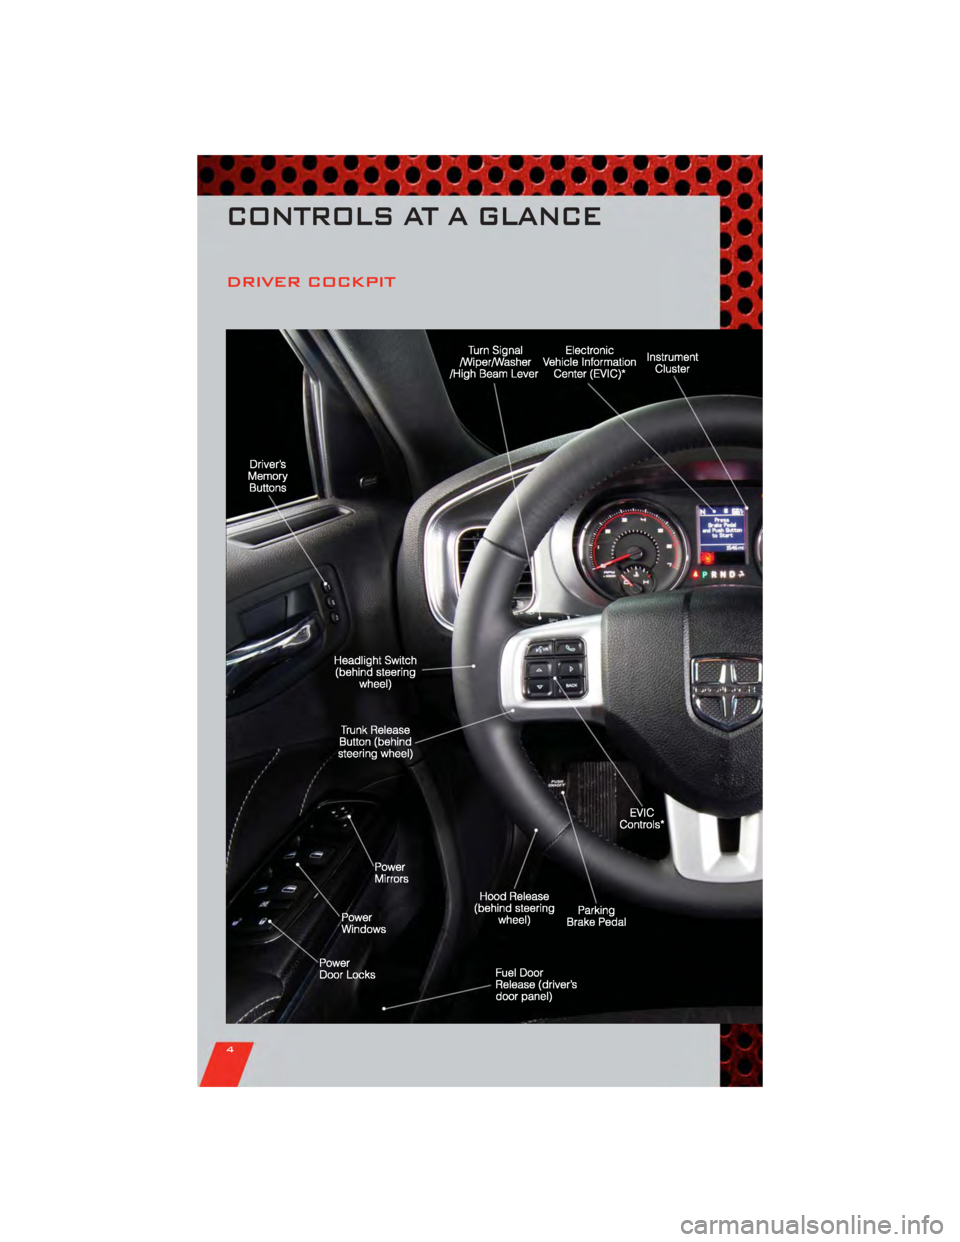 DODGE CHARGER 2011 7.G Owners Manual DRIVER COCKPIT
CONTROLS AT A GLANCE
4 